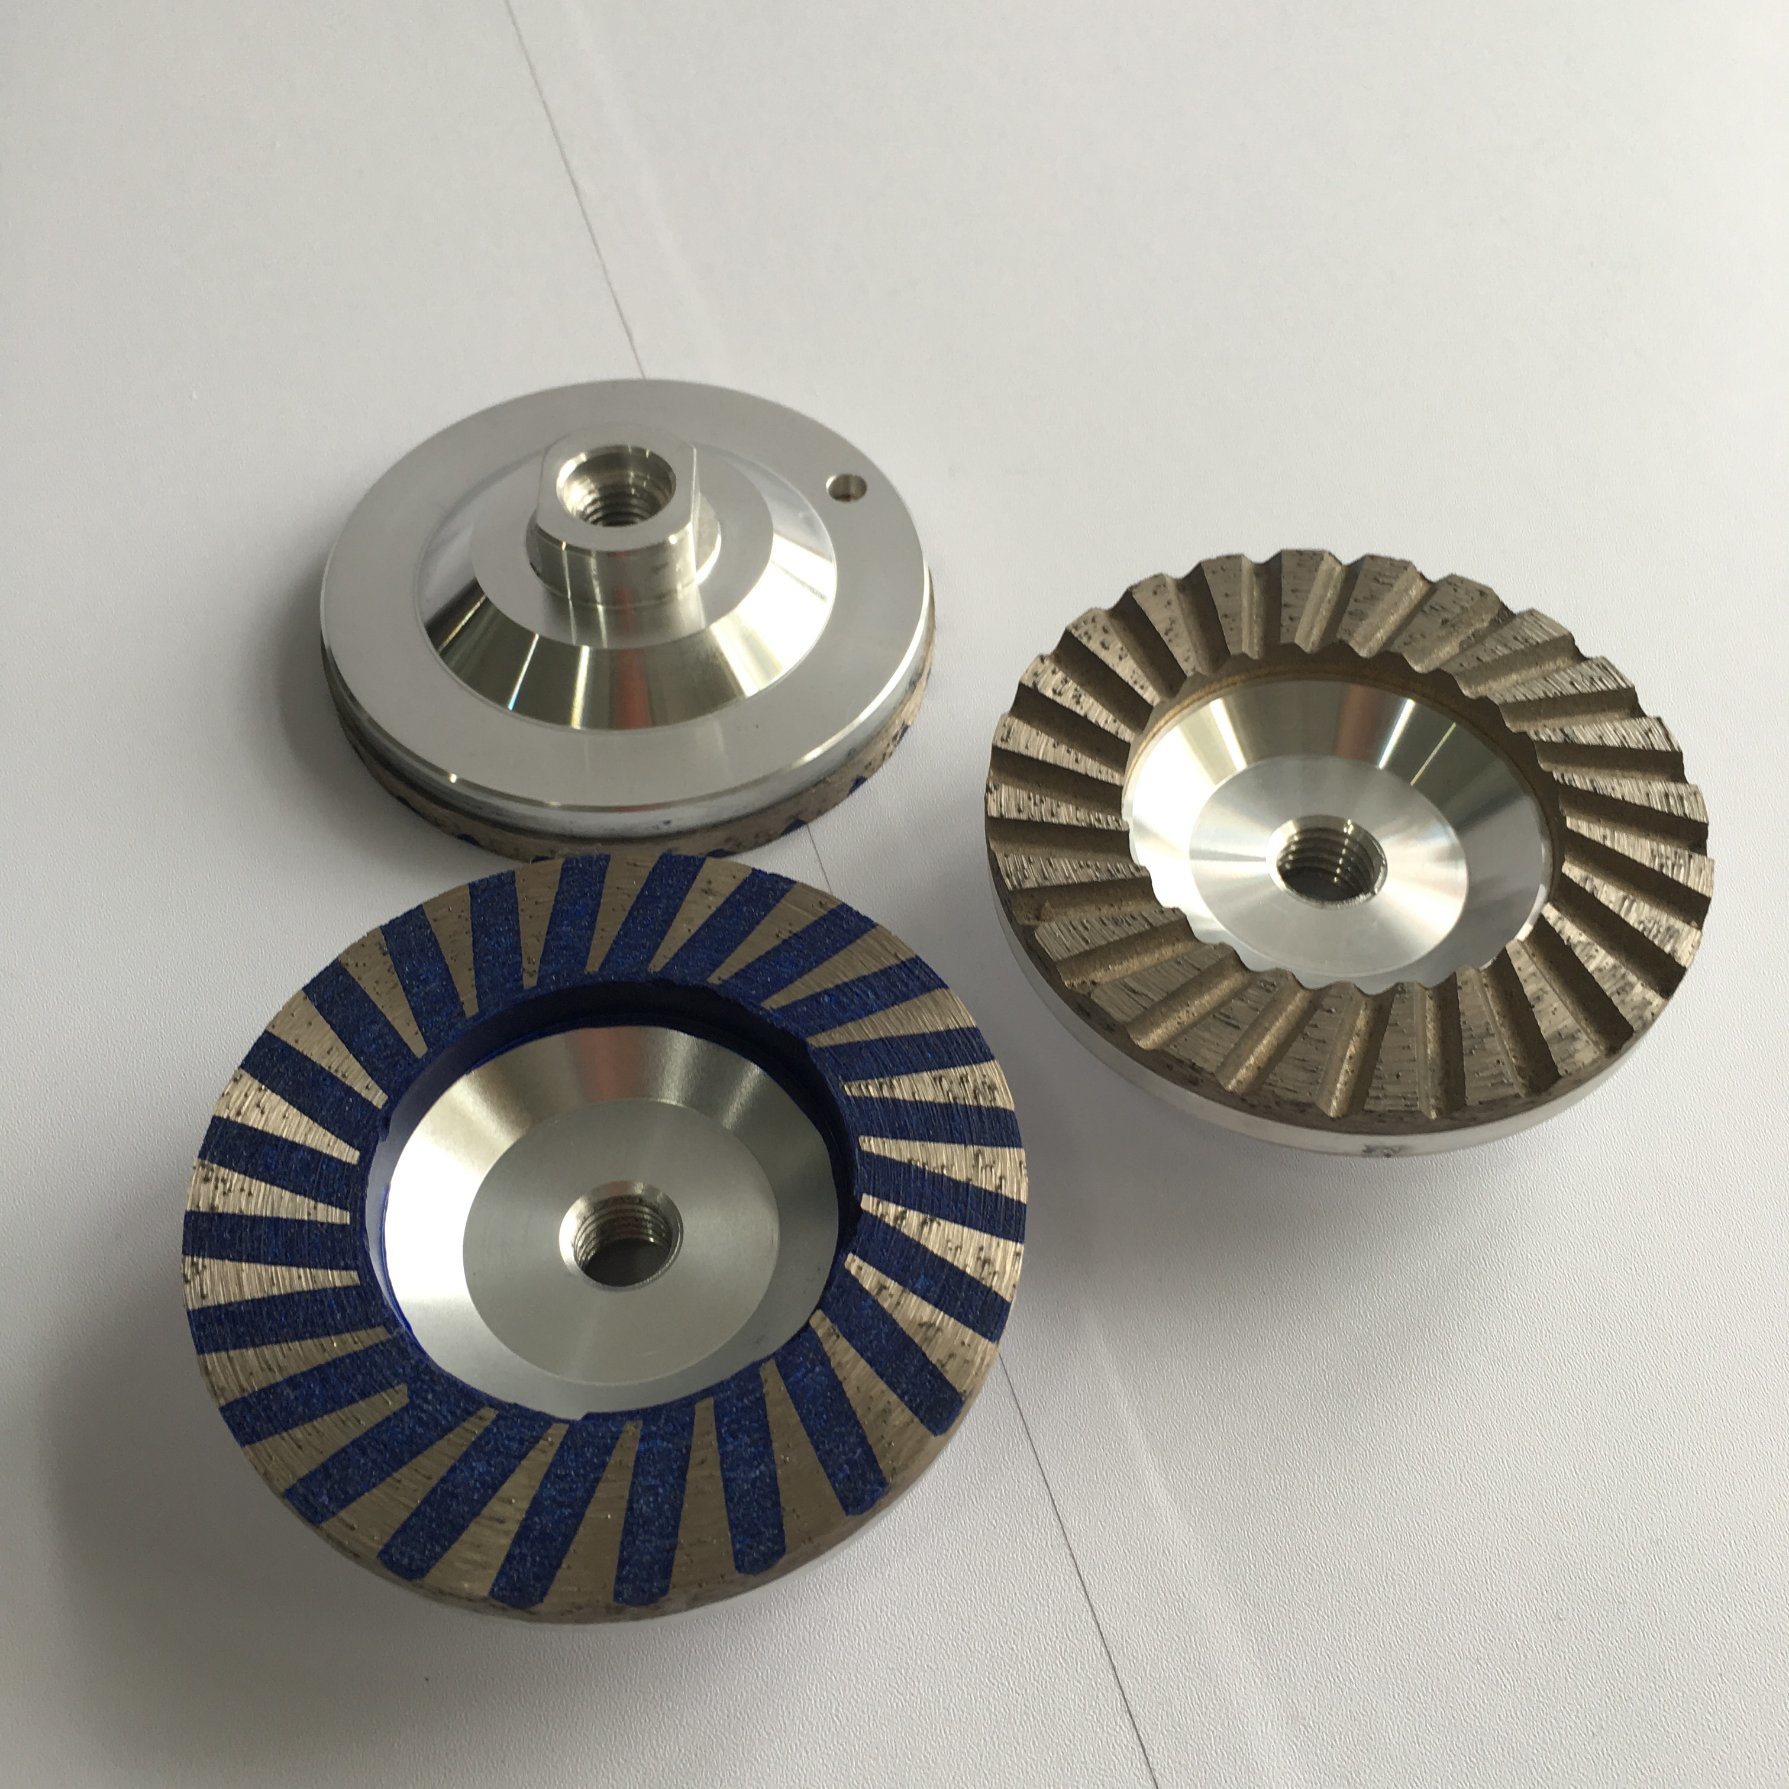 High Quality Diamond Grinding Cup Wheel for Stone Grinding